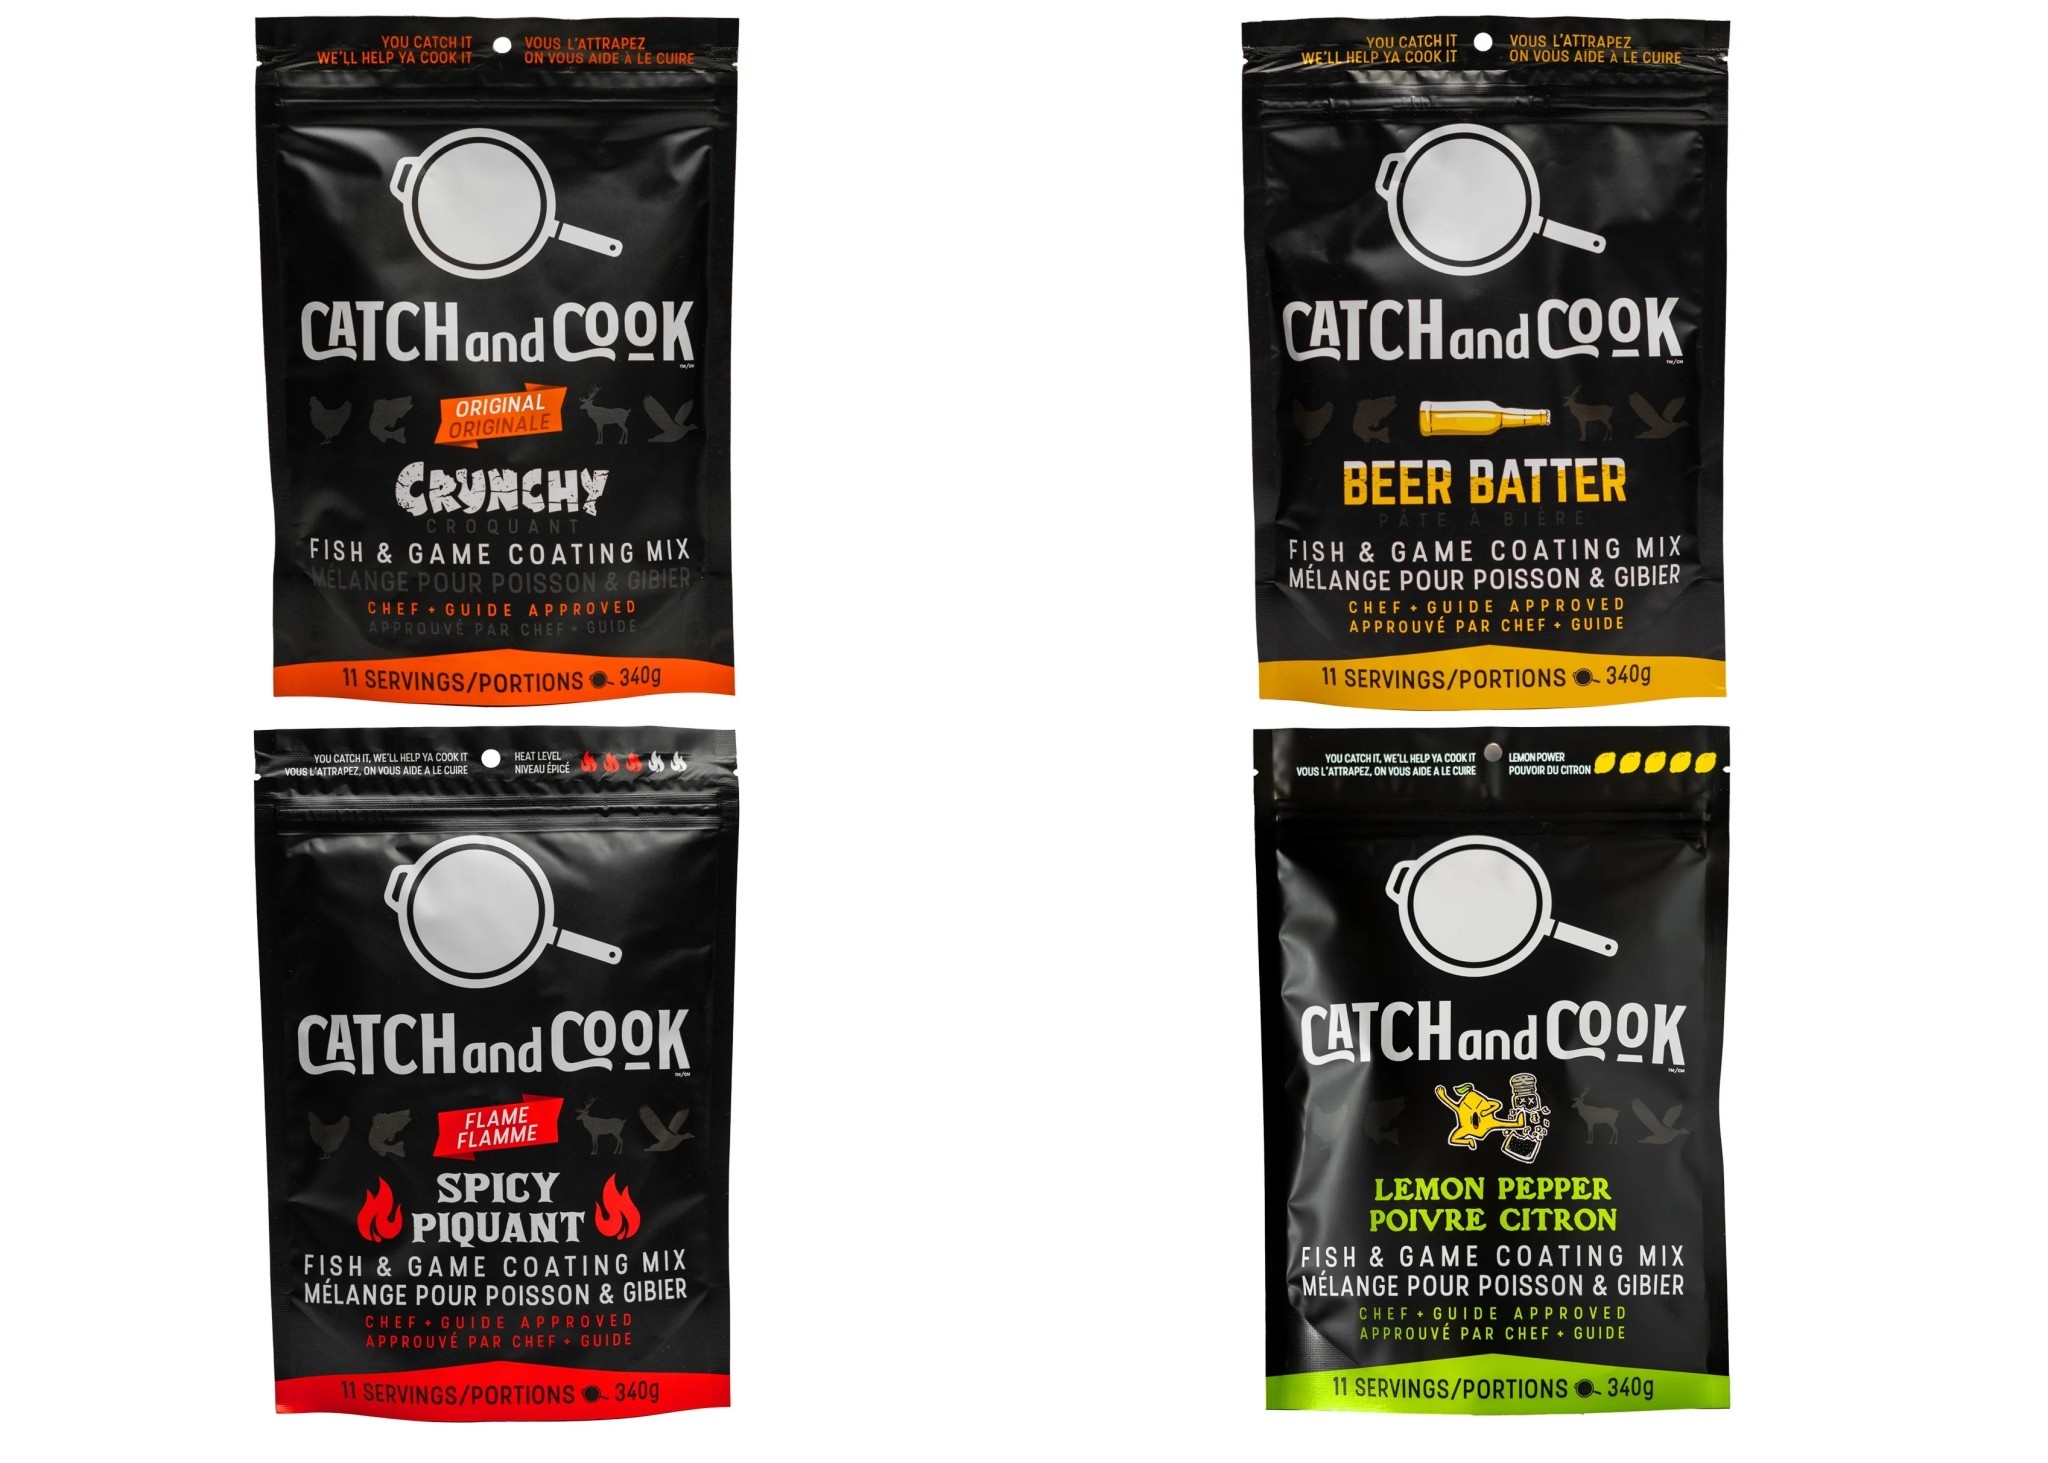 CATCH AND COOK CATCH AND COOK, ORIGINAL CRUNCHY